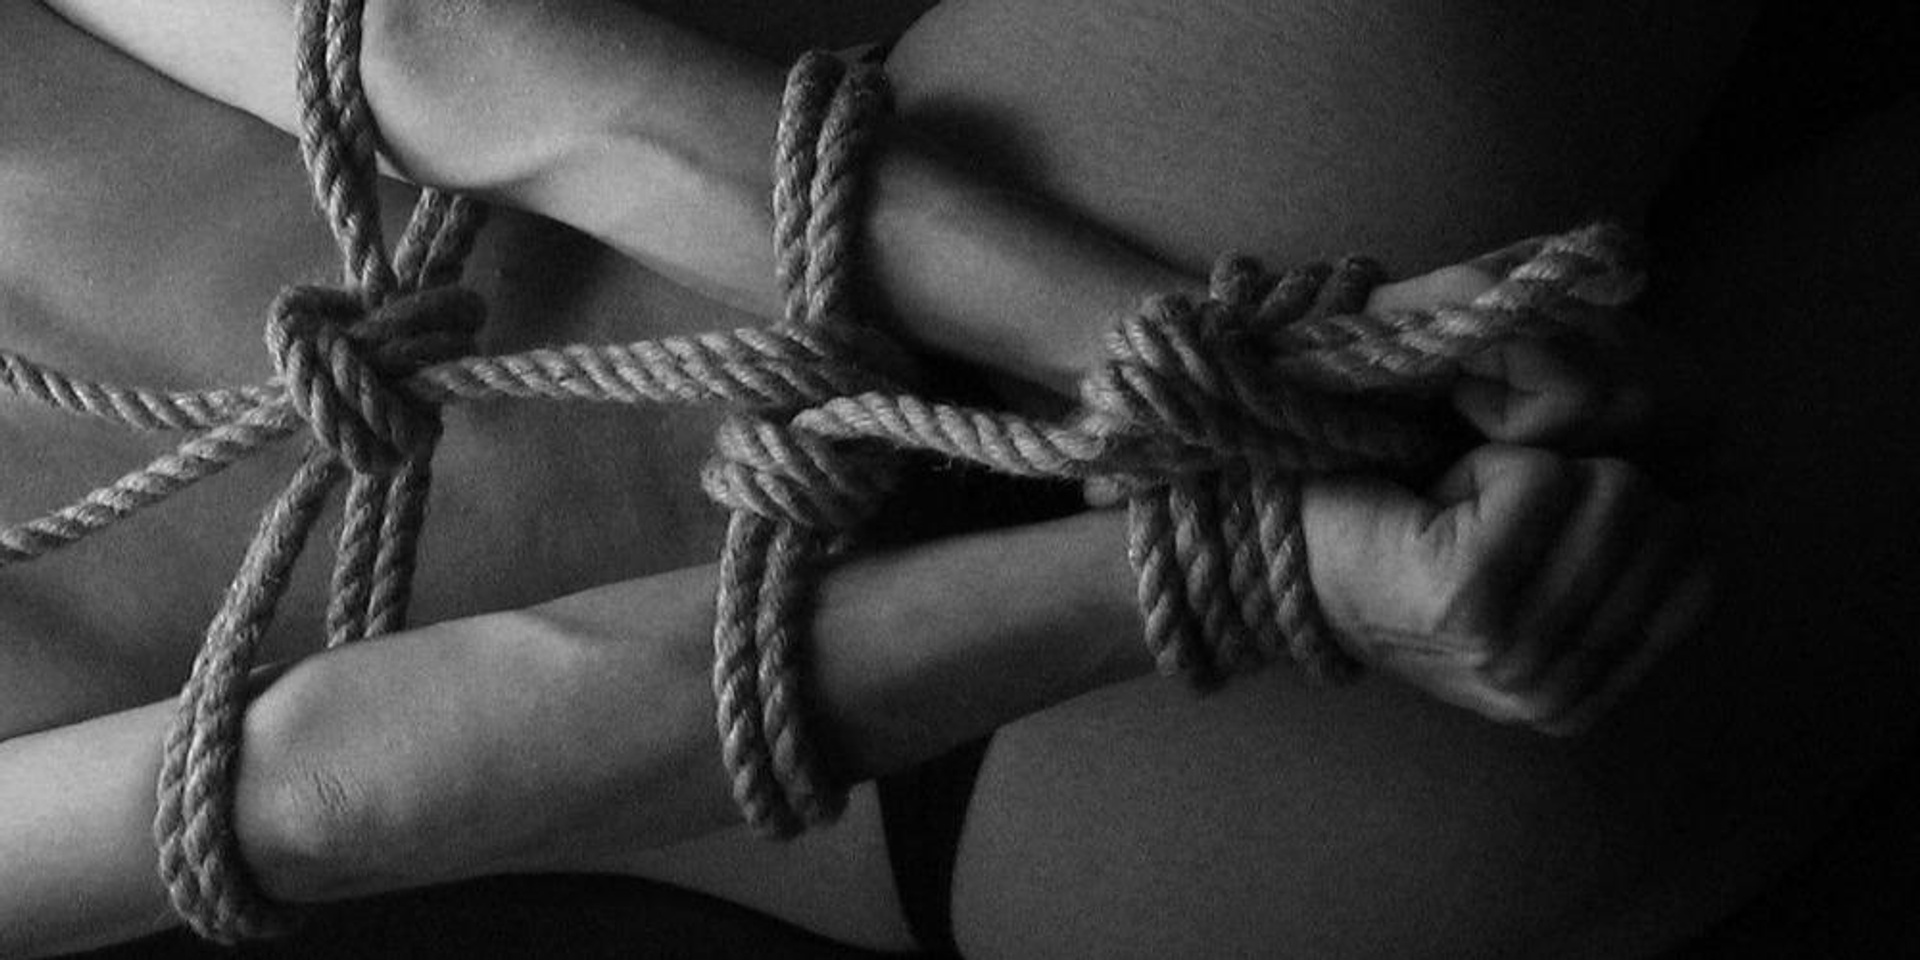 Queer Social: Intro to Deeper Intimacy and Connection via Shibari with Harley